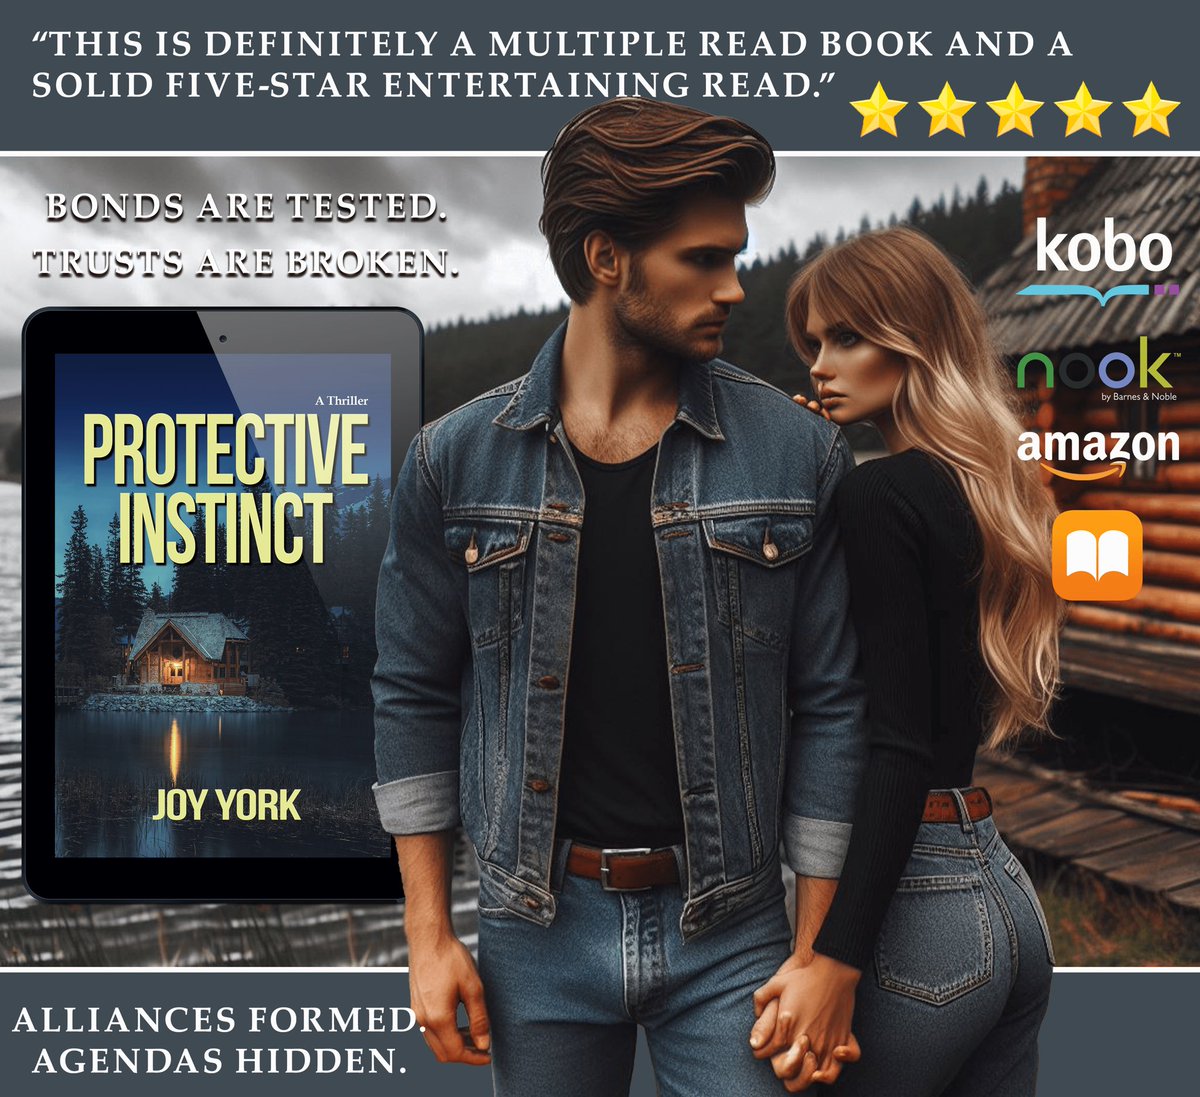 Protective Instinct: A Thriller Ebook on sale for #99cents til 6/16/2024. ⭐️ ⭐️⭐️⭐️⭐️ Review: “Author Joy York's novel Protective Instinct is a thrilling escape narrative blending suspense, crime, and intensive action.” #thriller #mystery #actionadventure